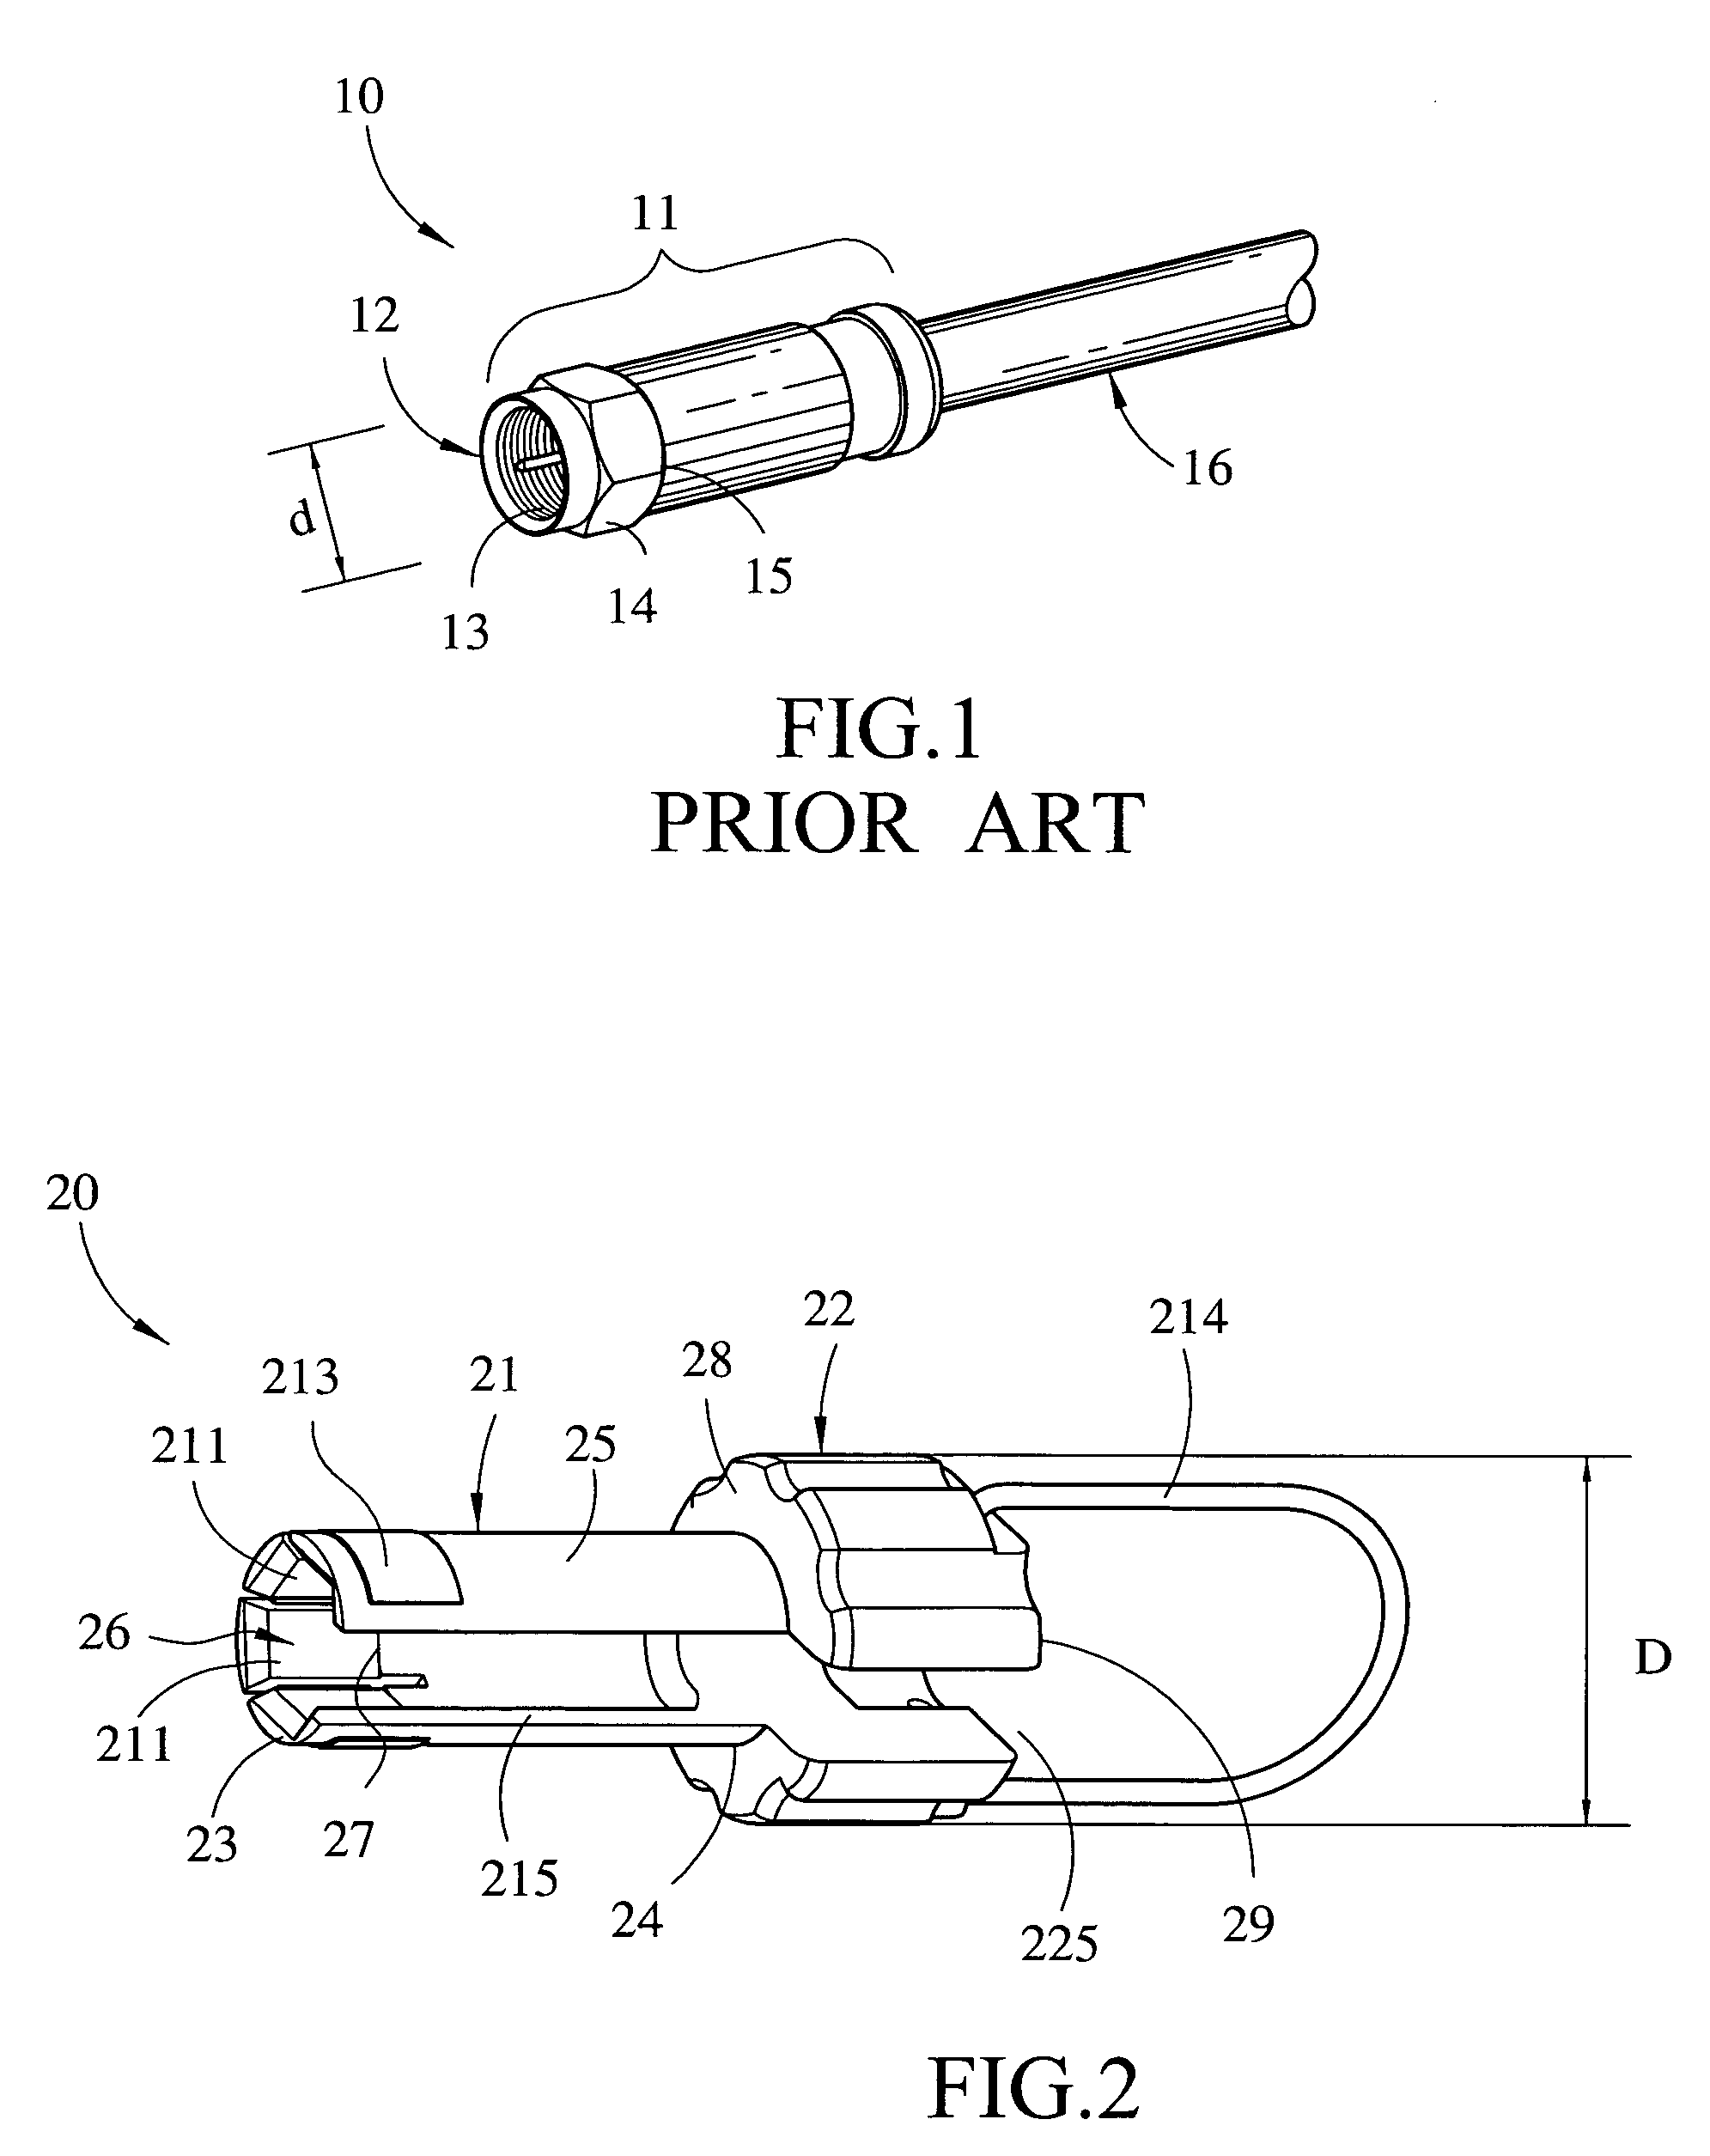 Tool operable for connecting a male F-type coaxial cable connector